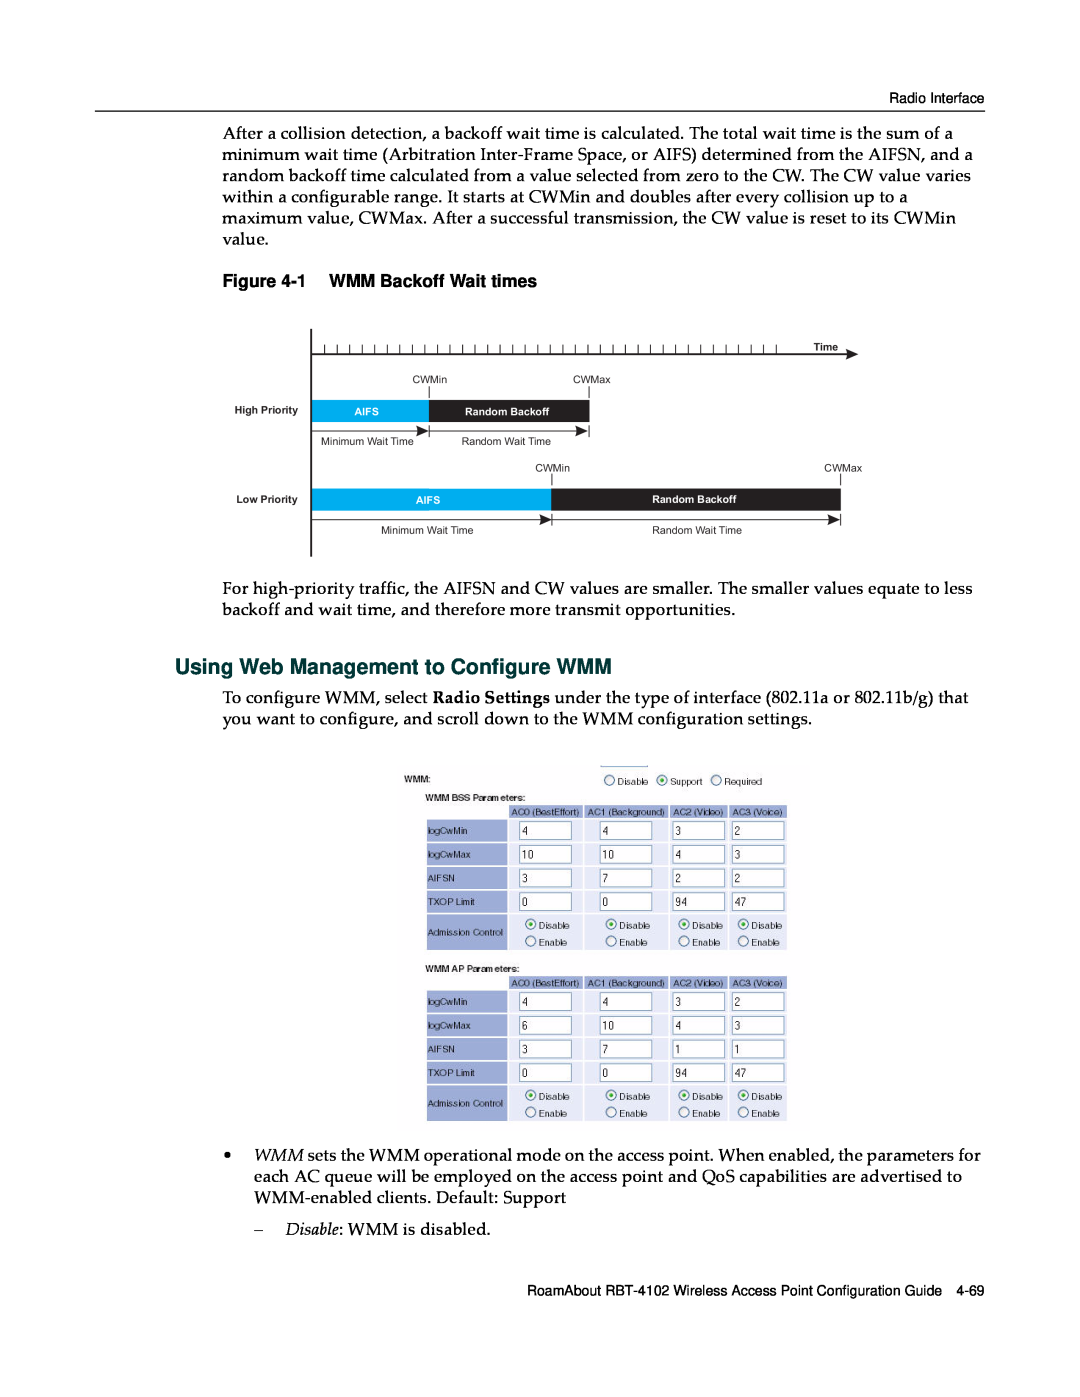 Enterasys Networks RBT-4102 manual Using Web Management to Configure WMM, 1 WMM Backoff Wait times 